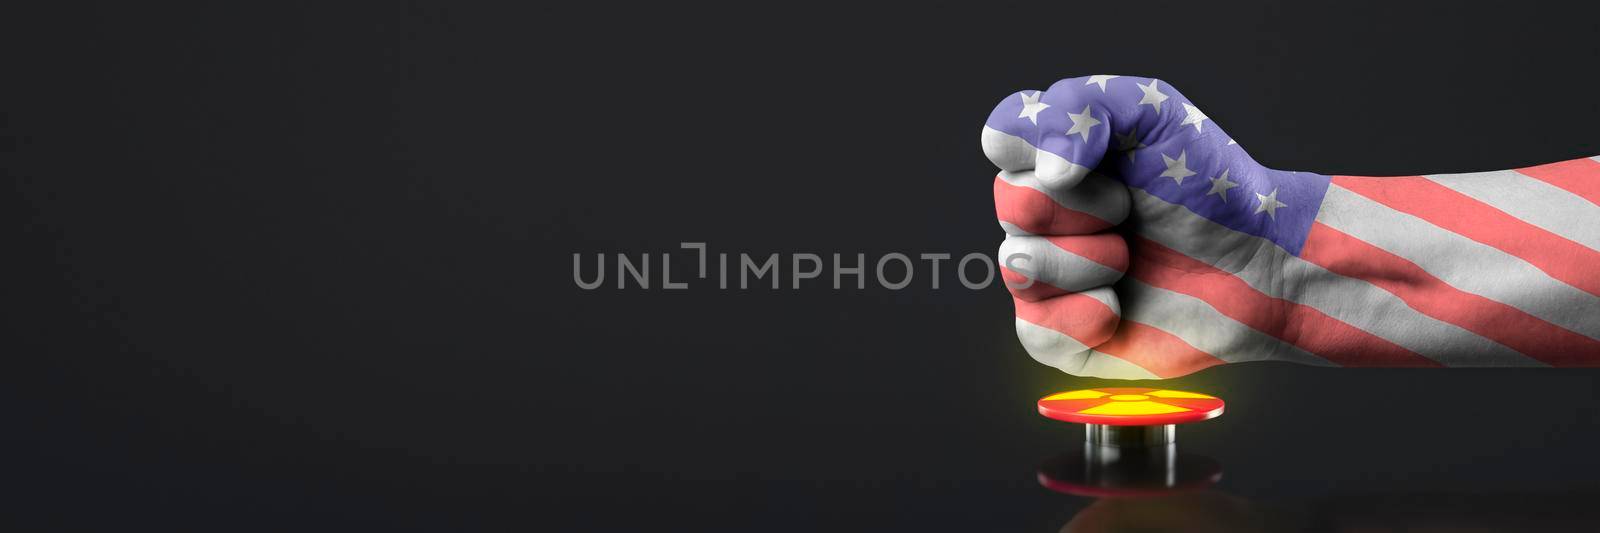 The hand presses the big red button. The concept of the threat of nuclear war. A hand painted in the colors of the American flag presses the button to launch a nuclear bomb. by SERSOL